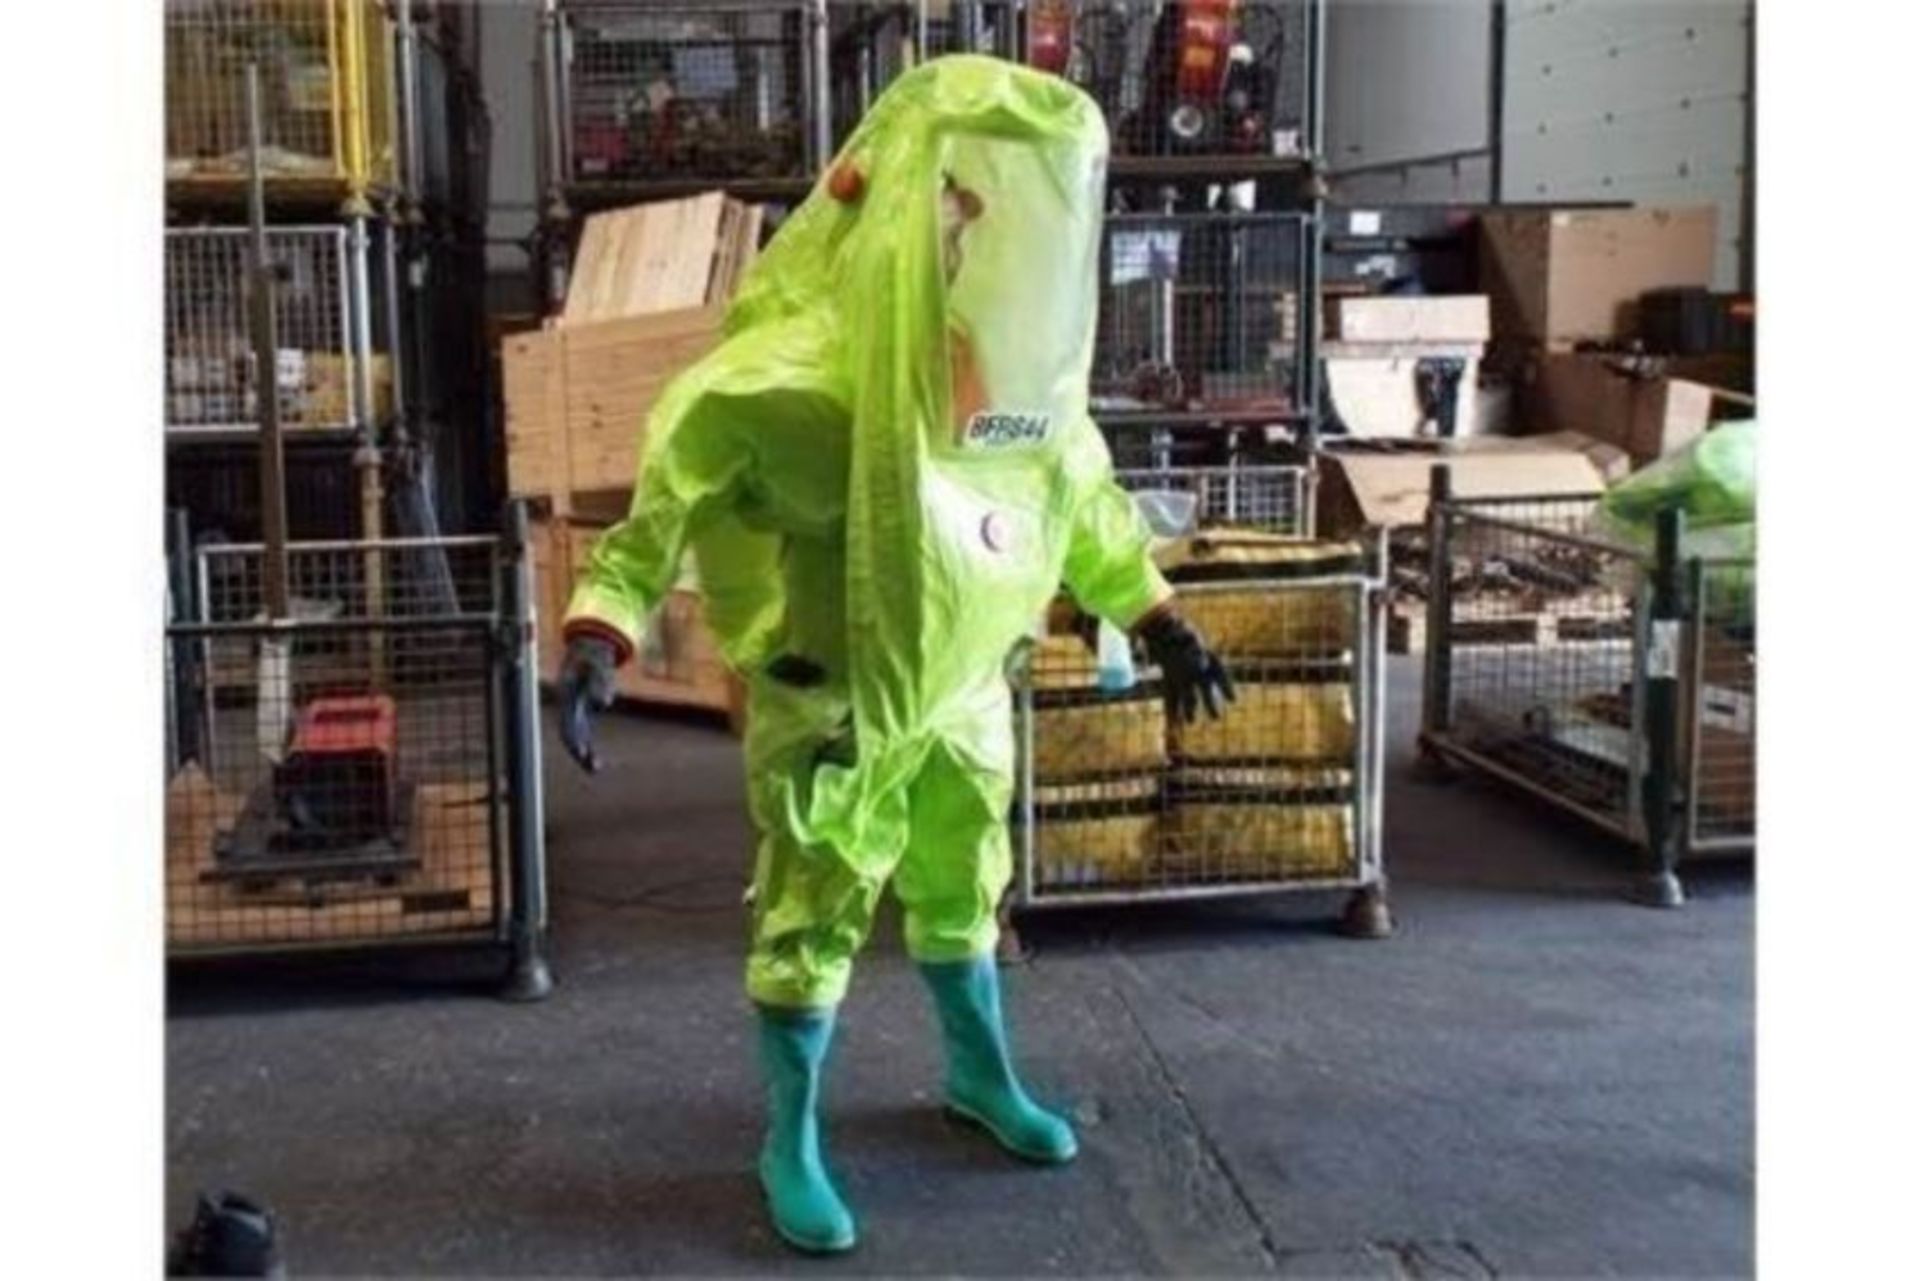 10 x Respirex Tychem TK Gas-Tight Hazmat Suit Type 1A with Attached Boots and Gloves - Image 2 of 10